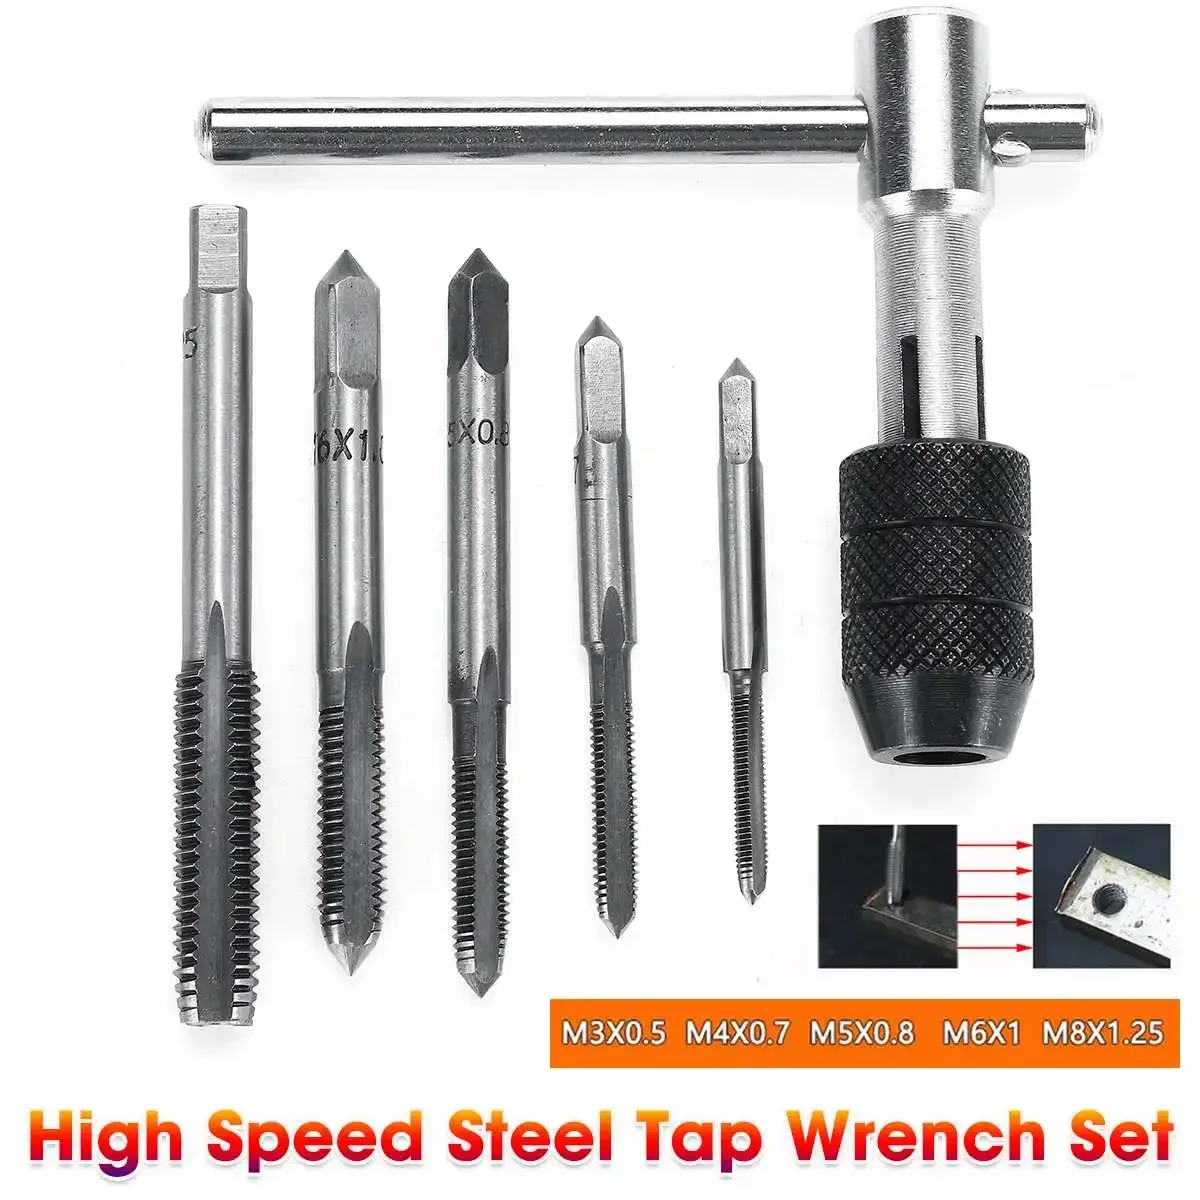 

Adjustable 3-8mm Hand Tool T-Handle Ratchet Tap Wrench Set with M3-M8 Machine Screw Thread Metric Plug Tap Machinist Tool